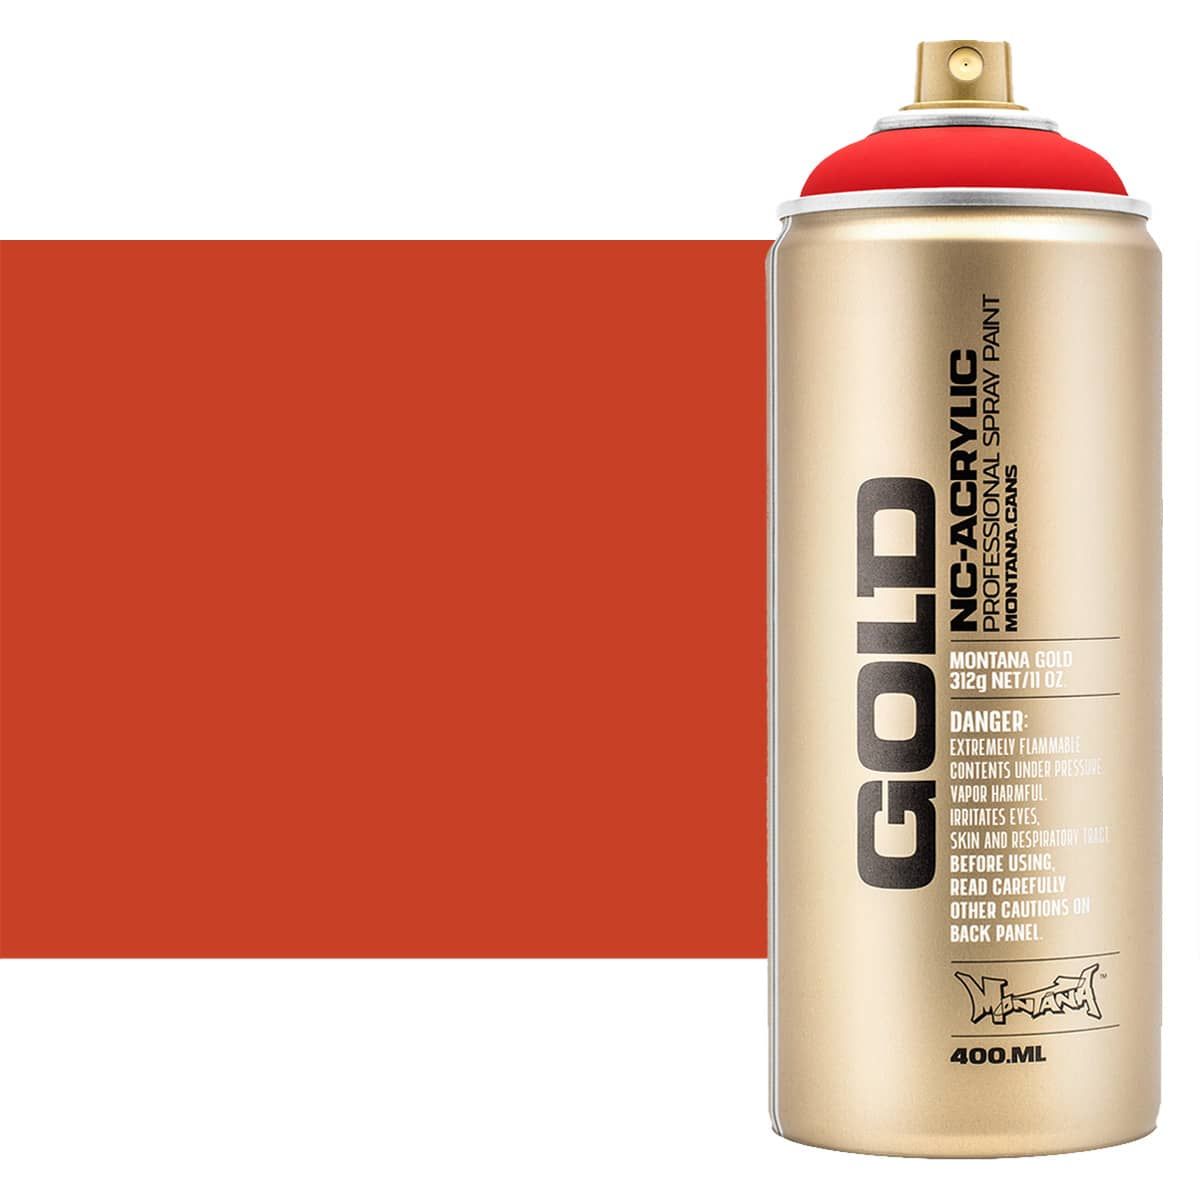 Montana Gold Acrylic Professional Spray Paint - Fire Red